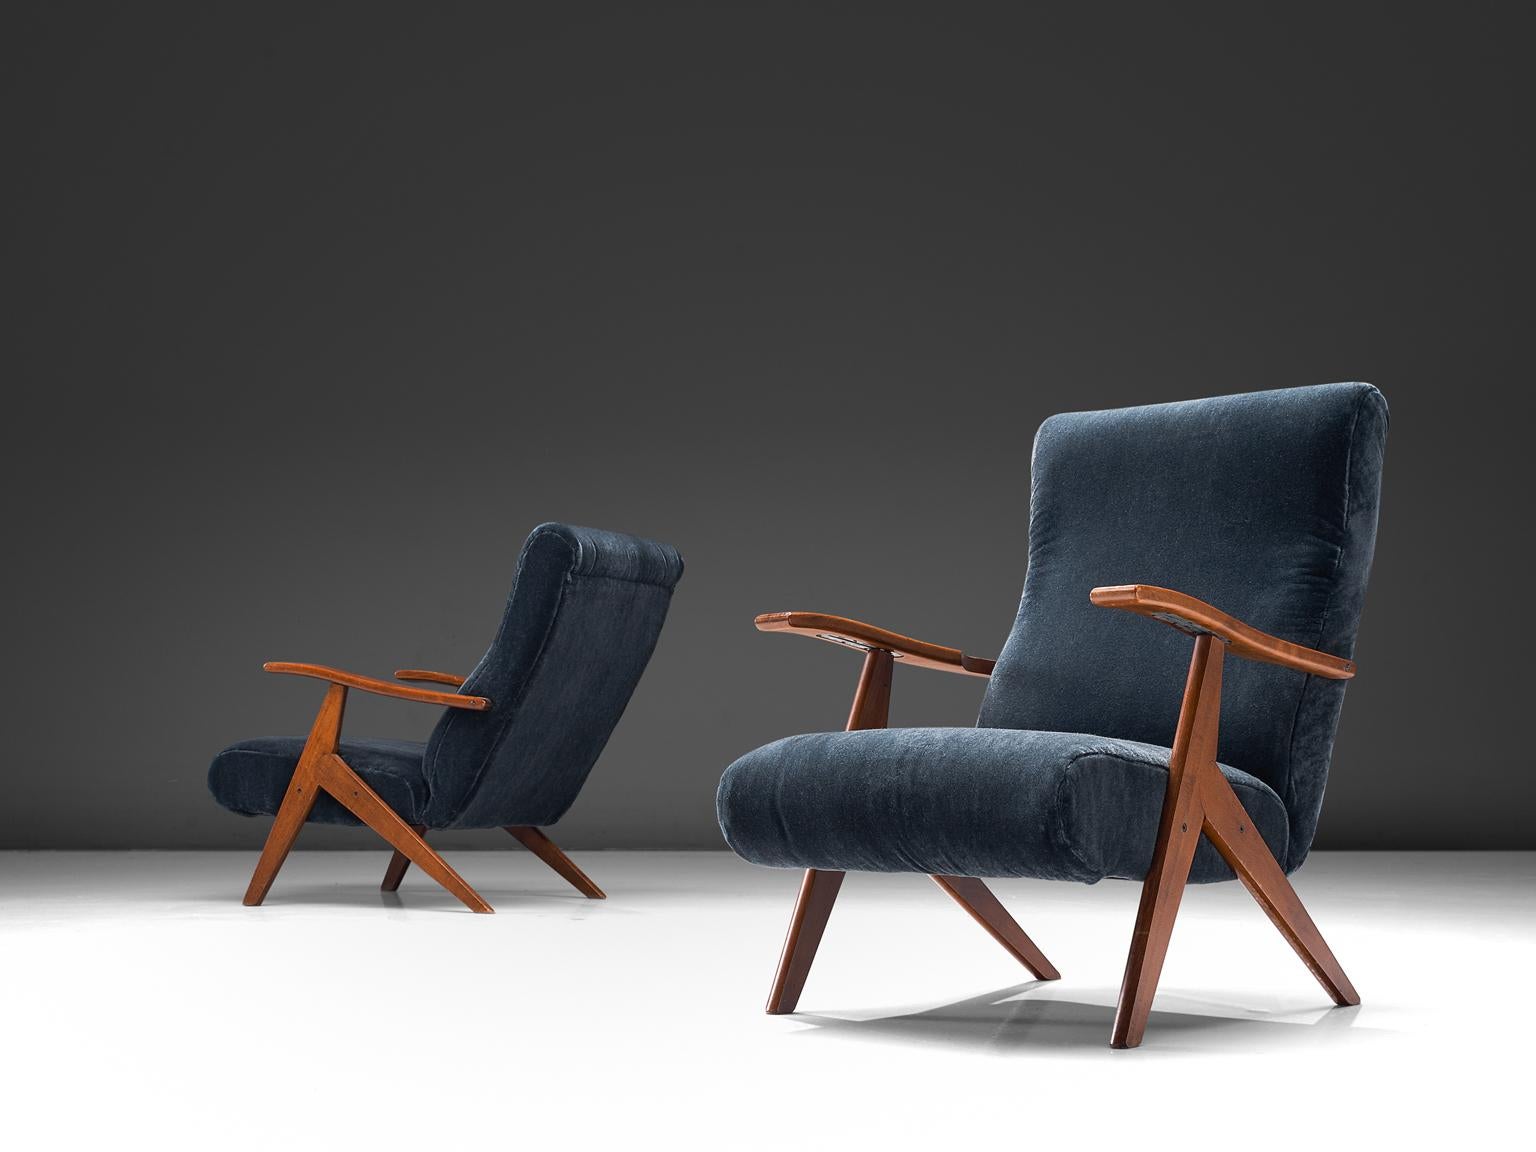 Adjustable lounge chairs, blue velvet and stained beech, Italy, 1950s

This set of easy chairs have a dark blue velvet upholstery, and have an interesting sculptural frame with the backrest being long and robust. The stained beech legs are